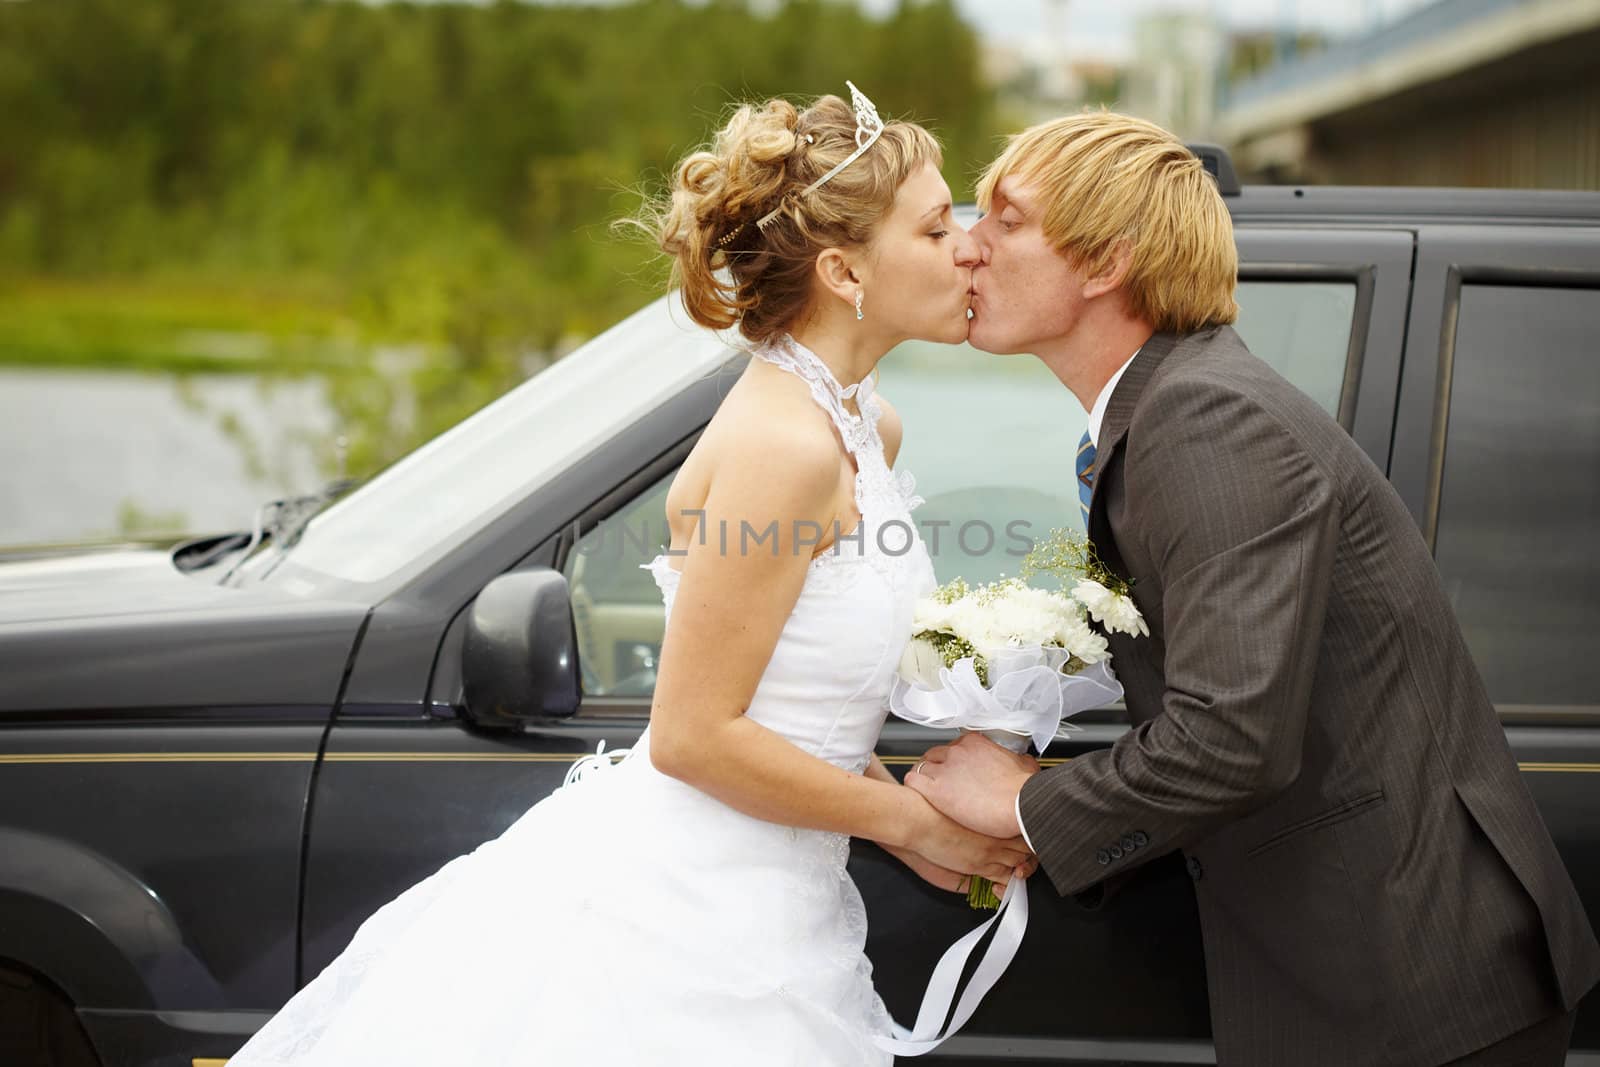 Bride and groom kissing near a car by pzaxe